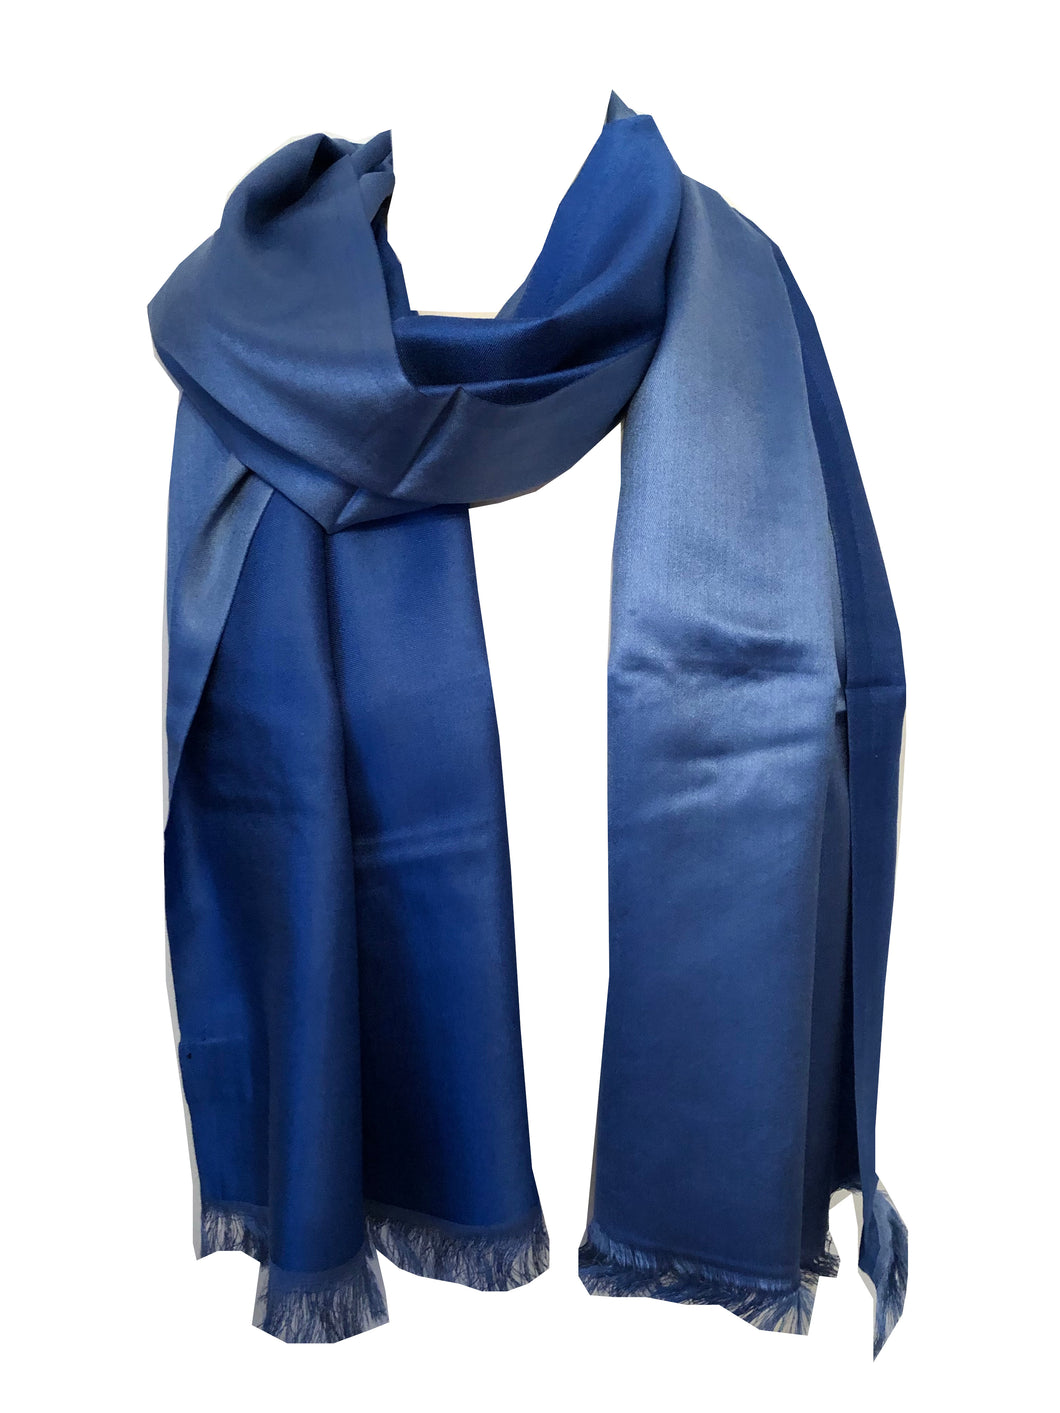 Pamper Yourself Now Blue and Light Blue Reversible 100% Silk Scarf/wrap with Slightly Frayed Edge Lovely Long Scarf